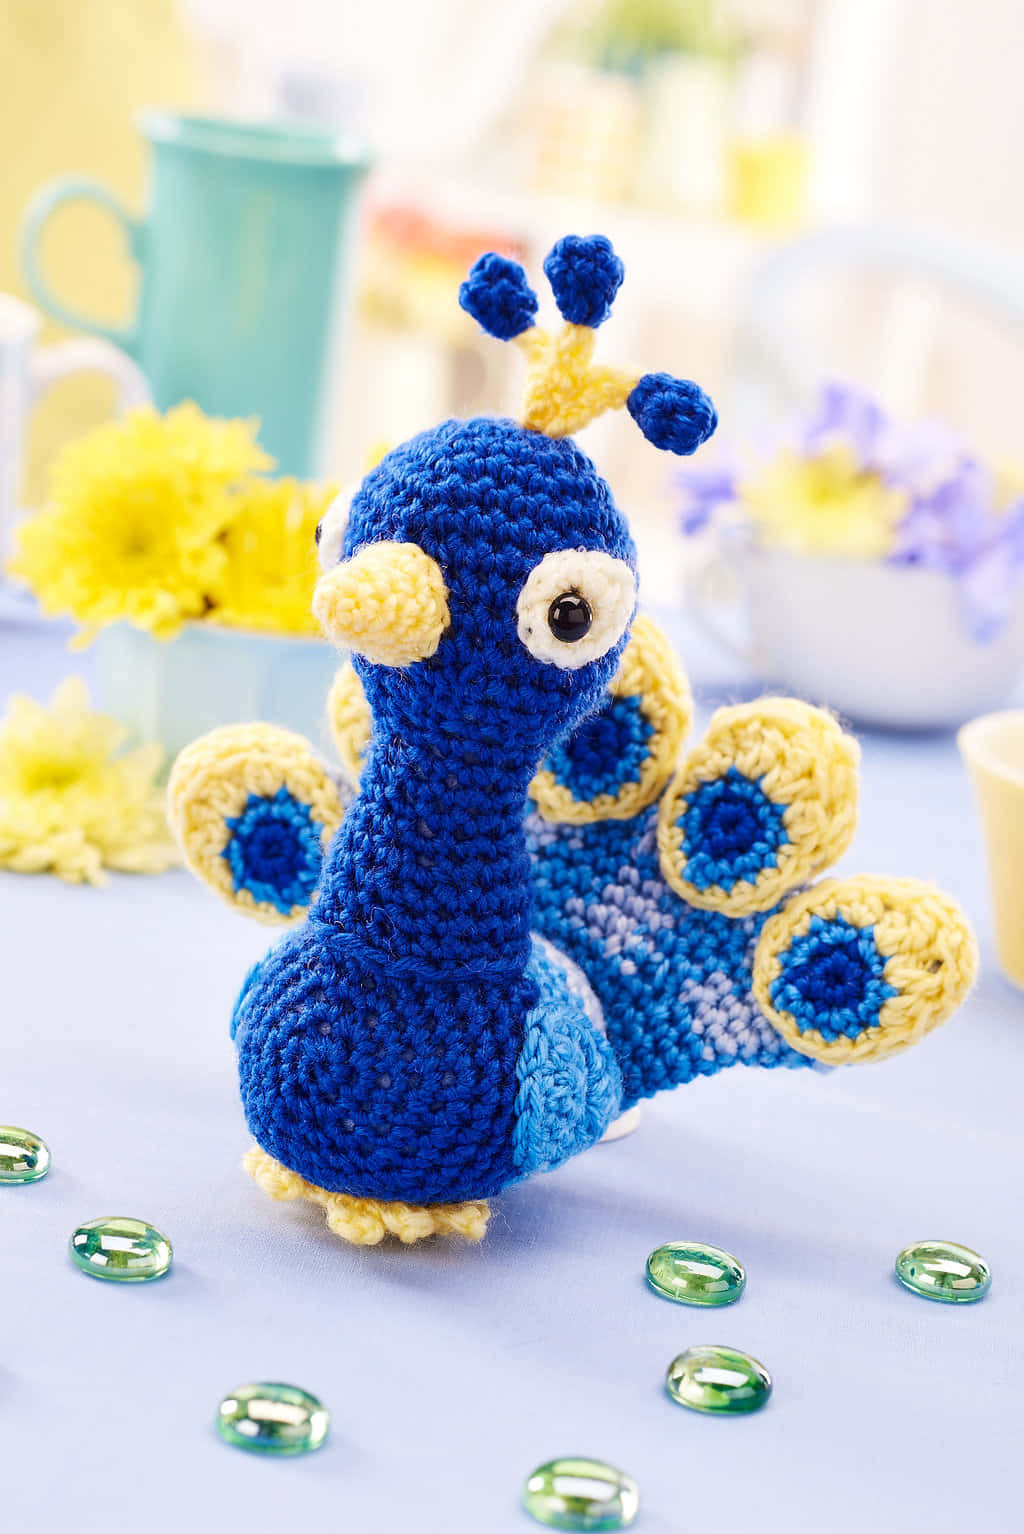 Learn the Basics of Crochet Patterns to Get Started